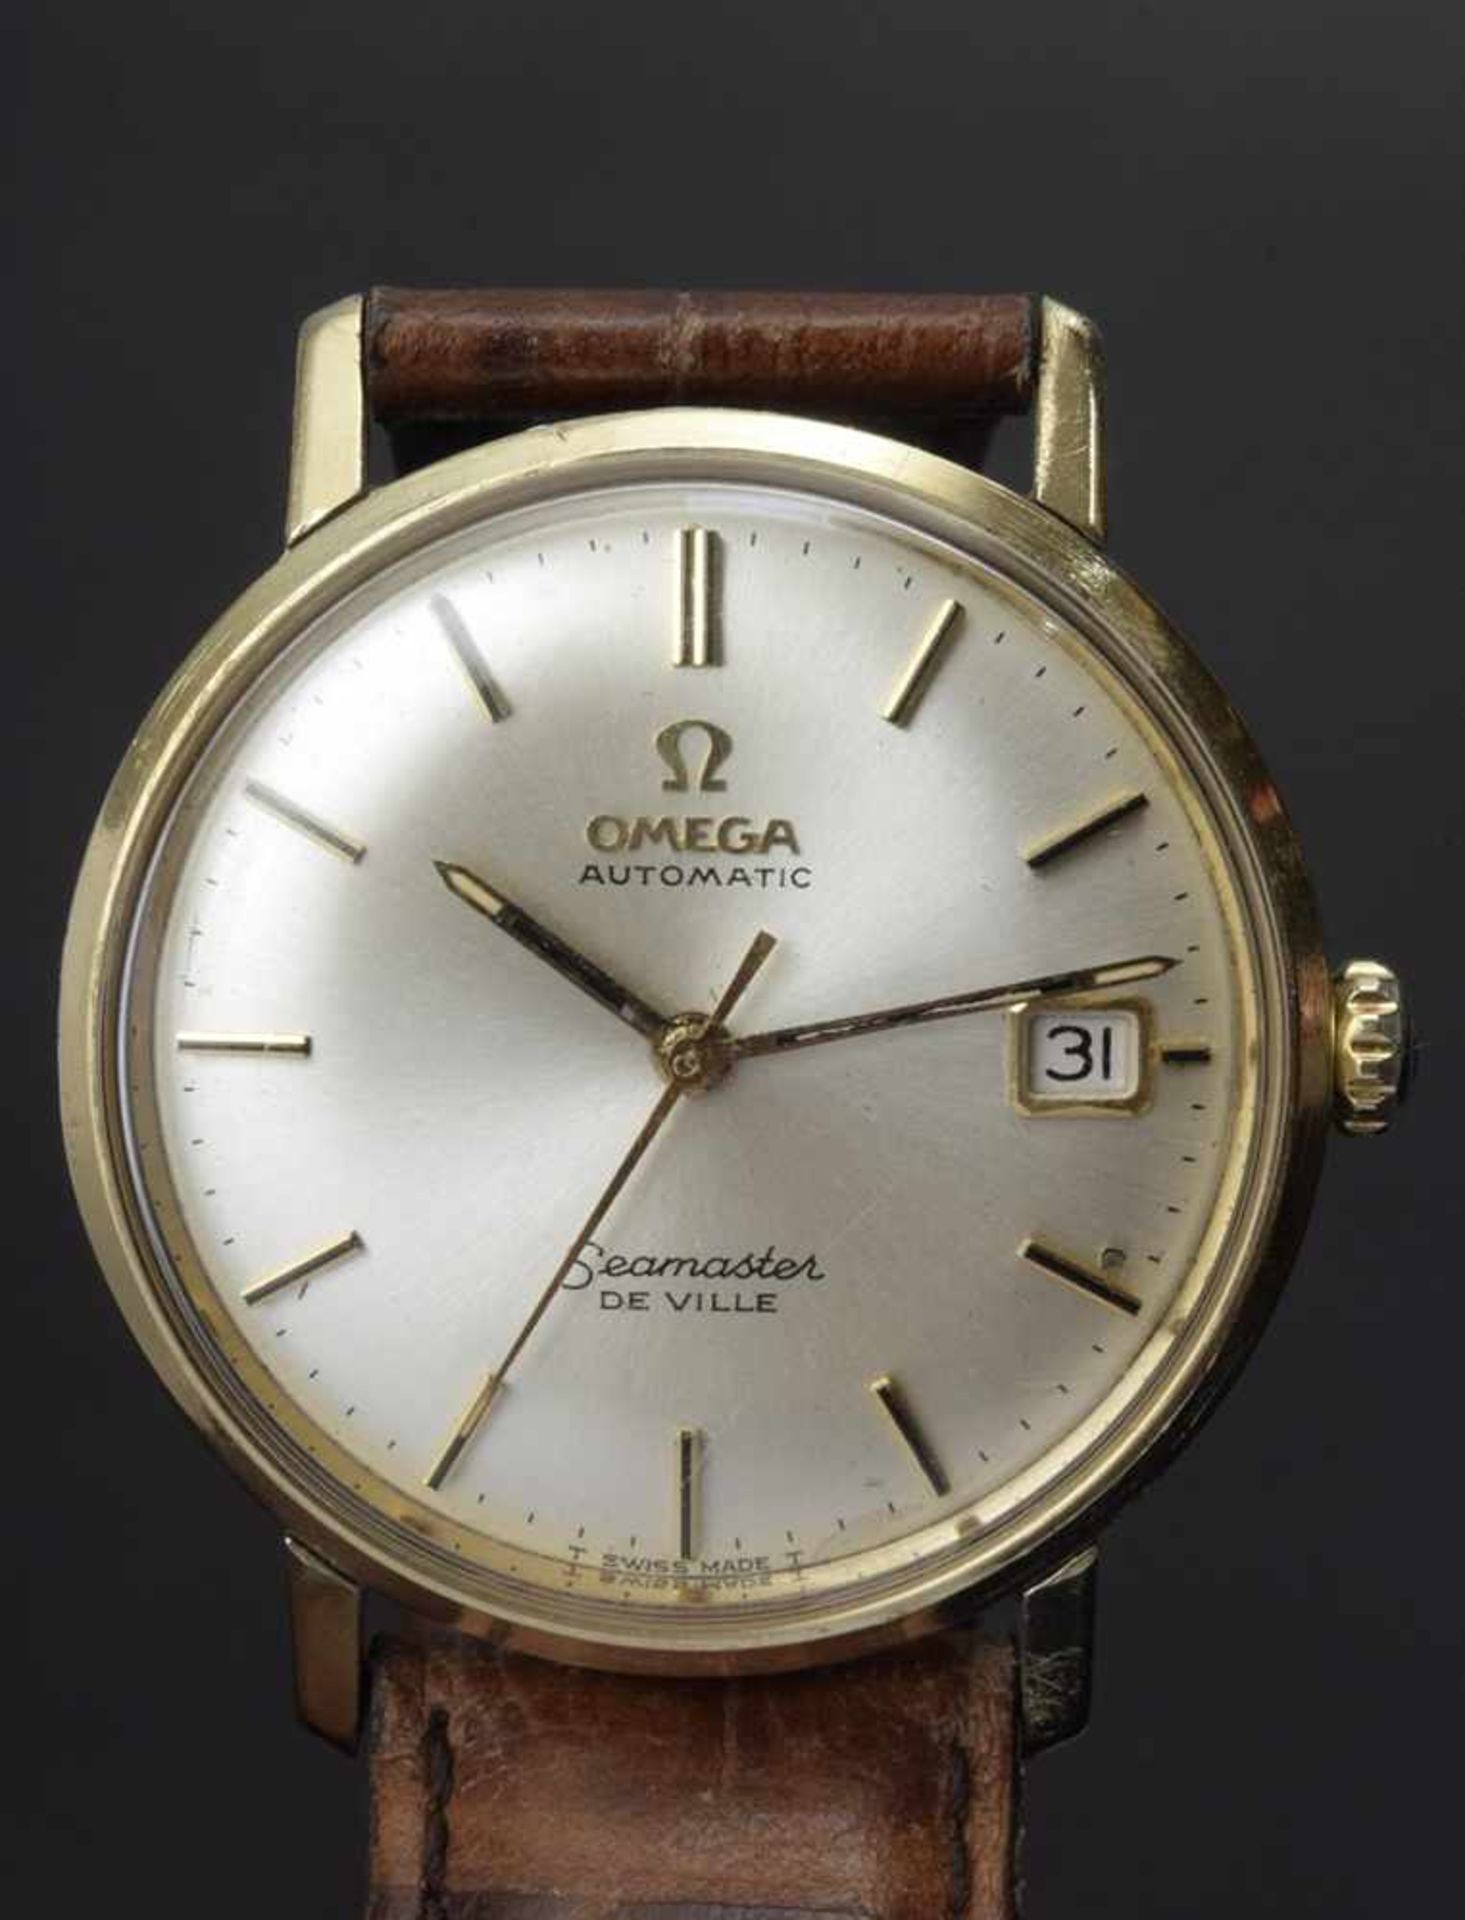 Omega "Seamaster de Ville" watch, Chronograph, automatic movement, stainless steel/gold-plated, - Image 4 of 5